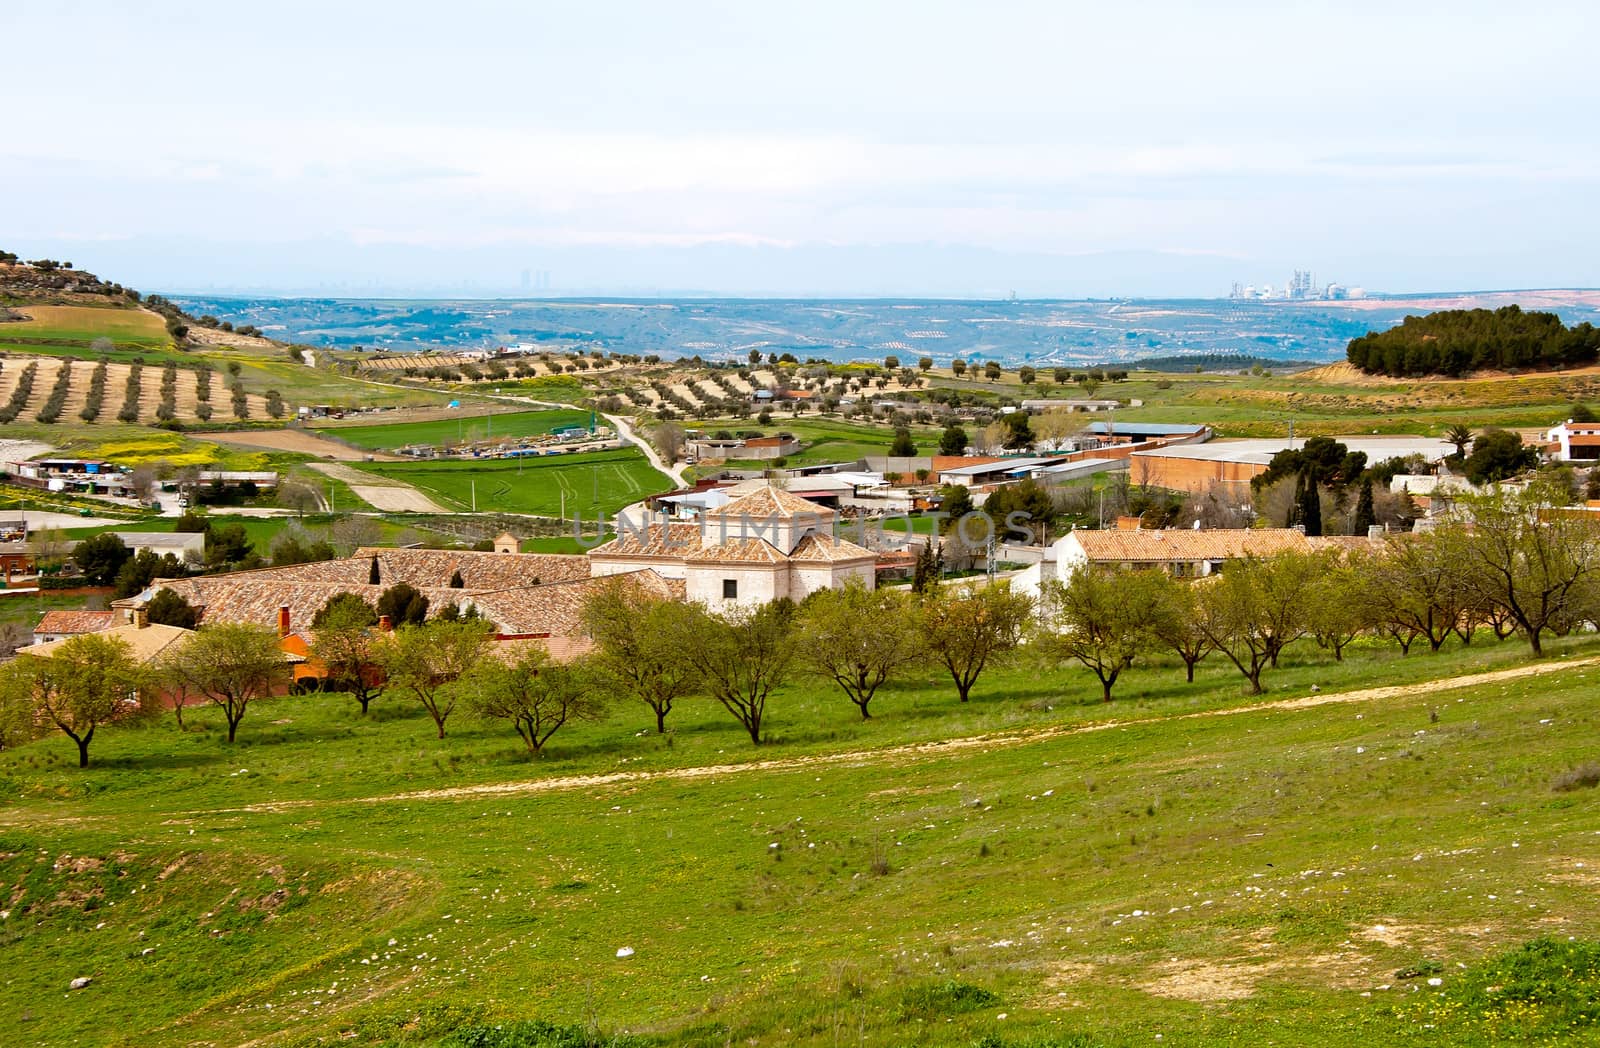 Fields around old town Chinchon in Spain